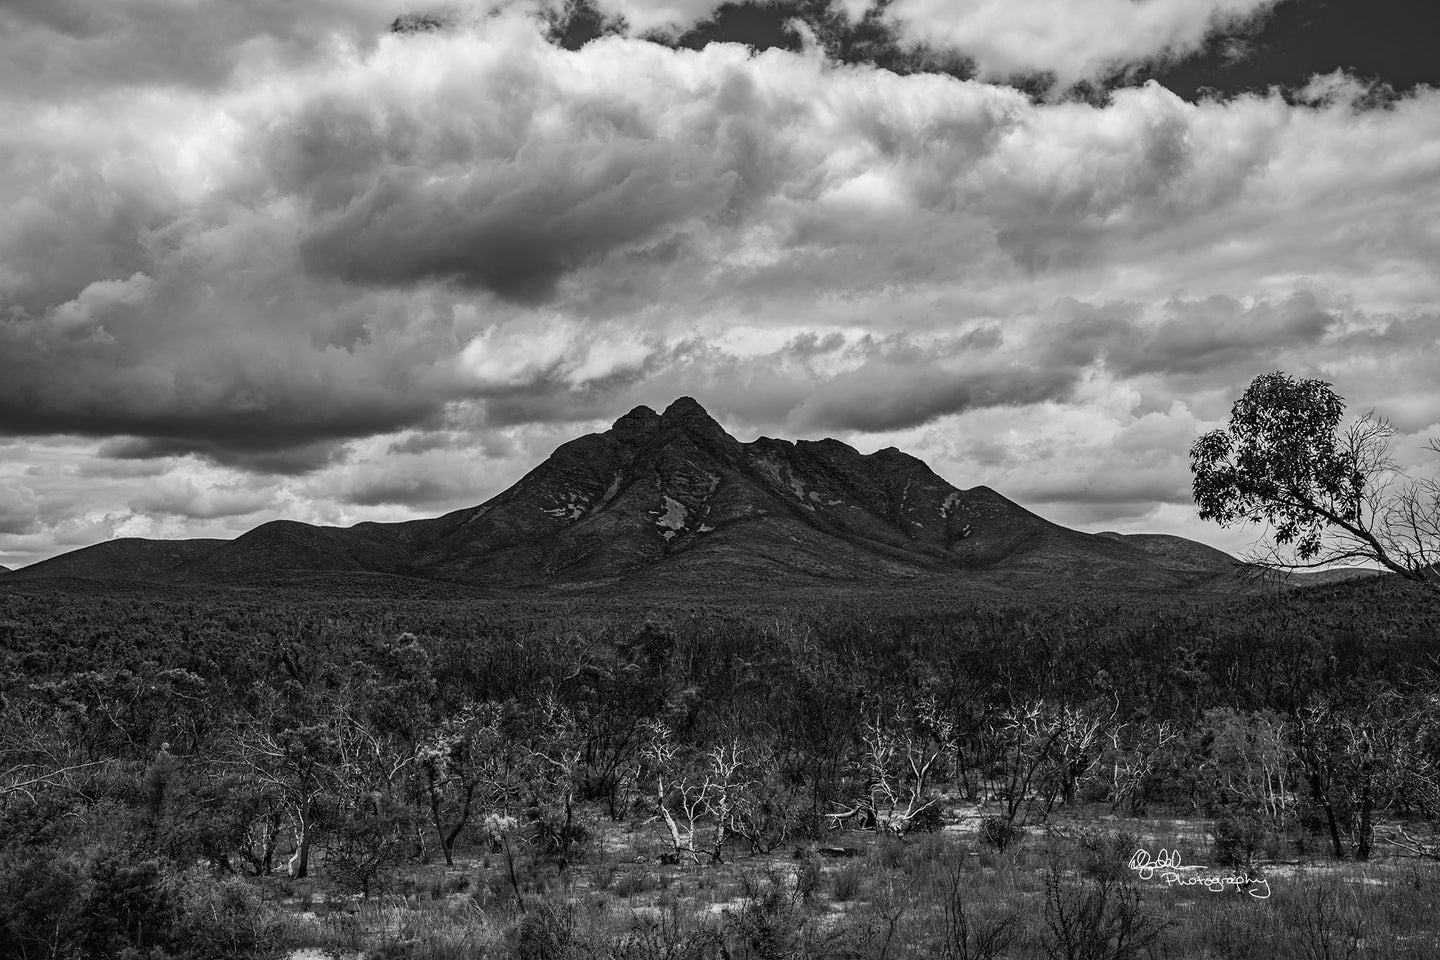 The Stirling Ranges - Memories of Fire, Mount Toolbranup